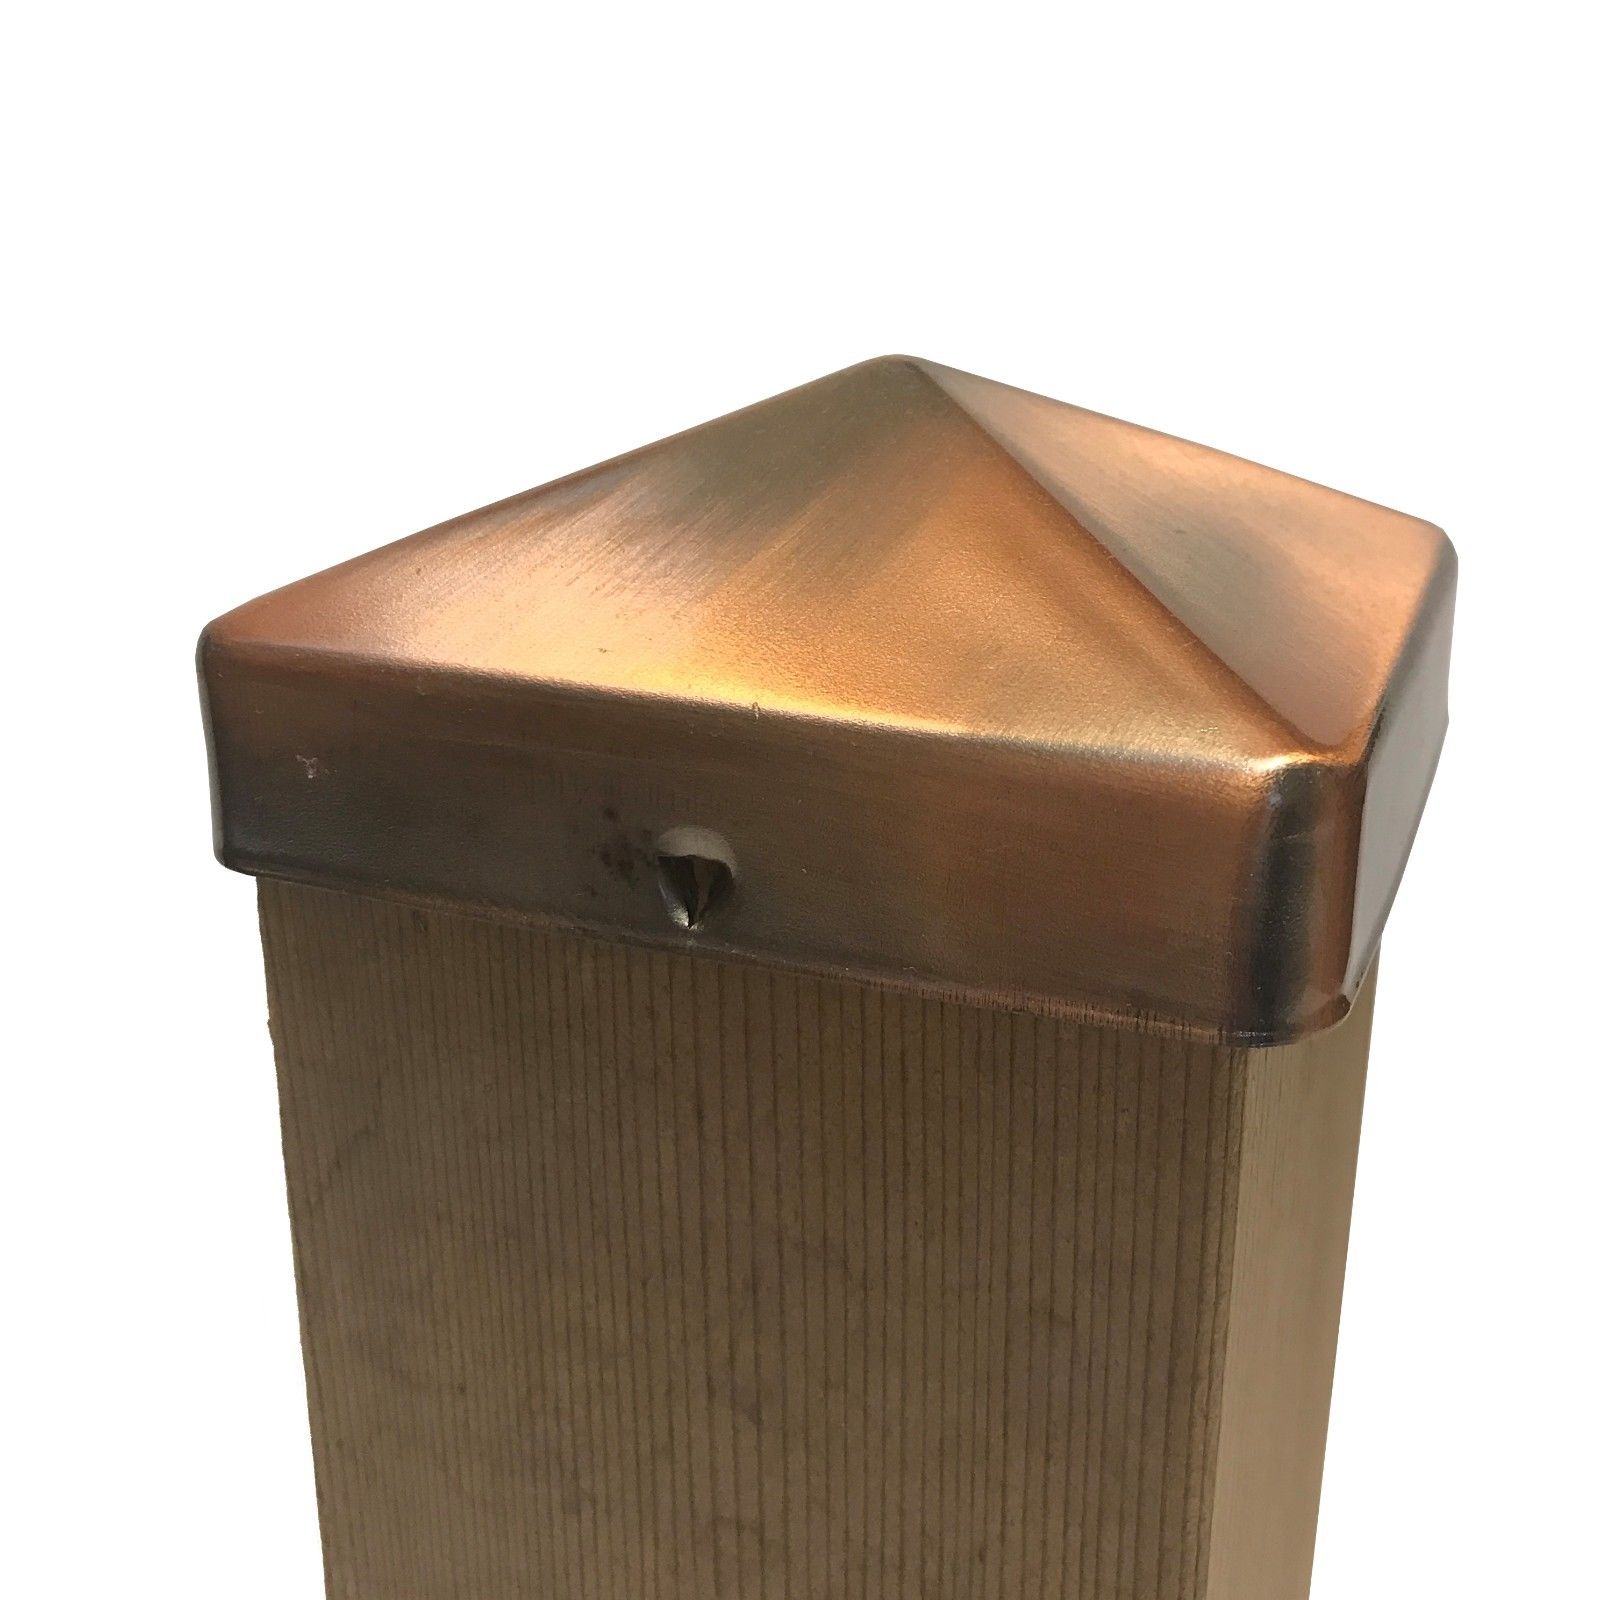 Nuvo Iron US Eazy Cap for 3.5" x 3.5" Posts Copper Plated Pressure Fit 